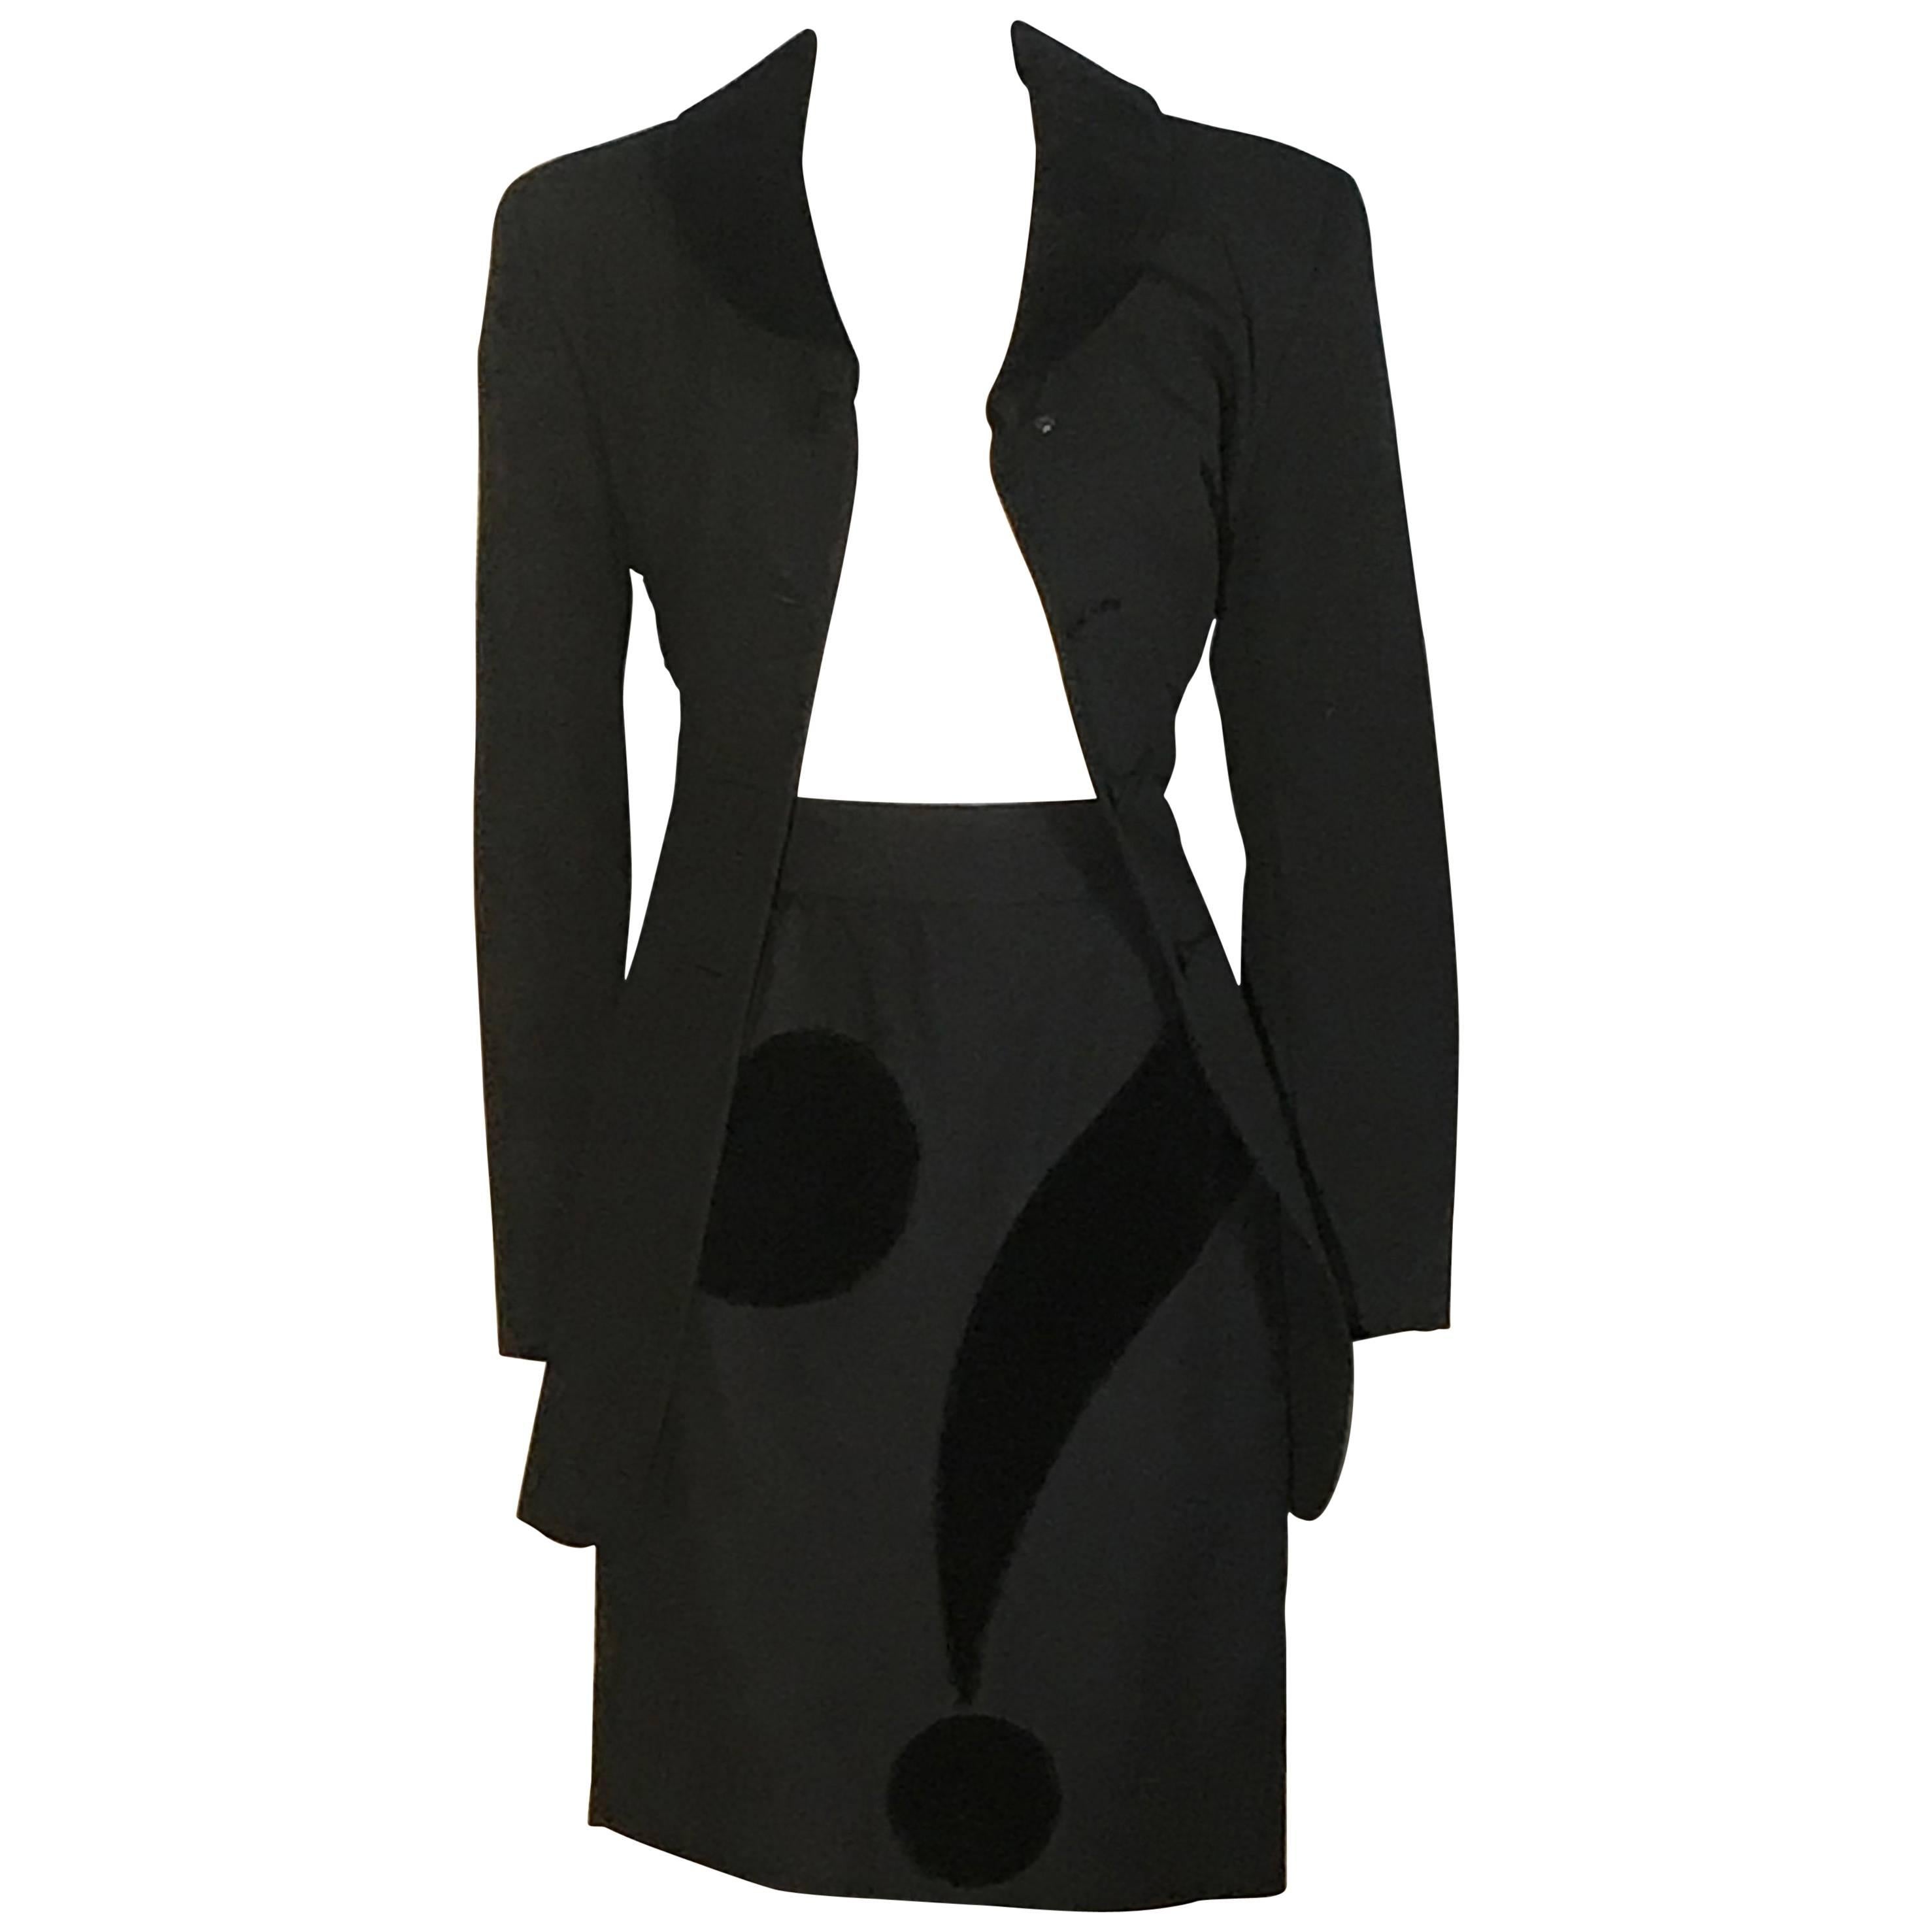 Moschino Cheap & Chic 1990s Black Question Mark Jacket and Skirt Suit For Sale